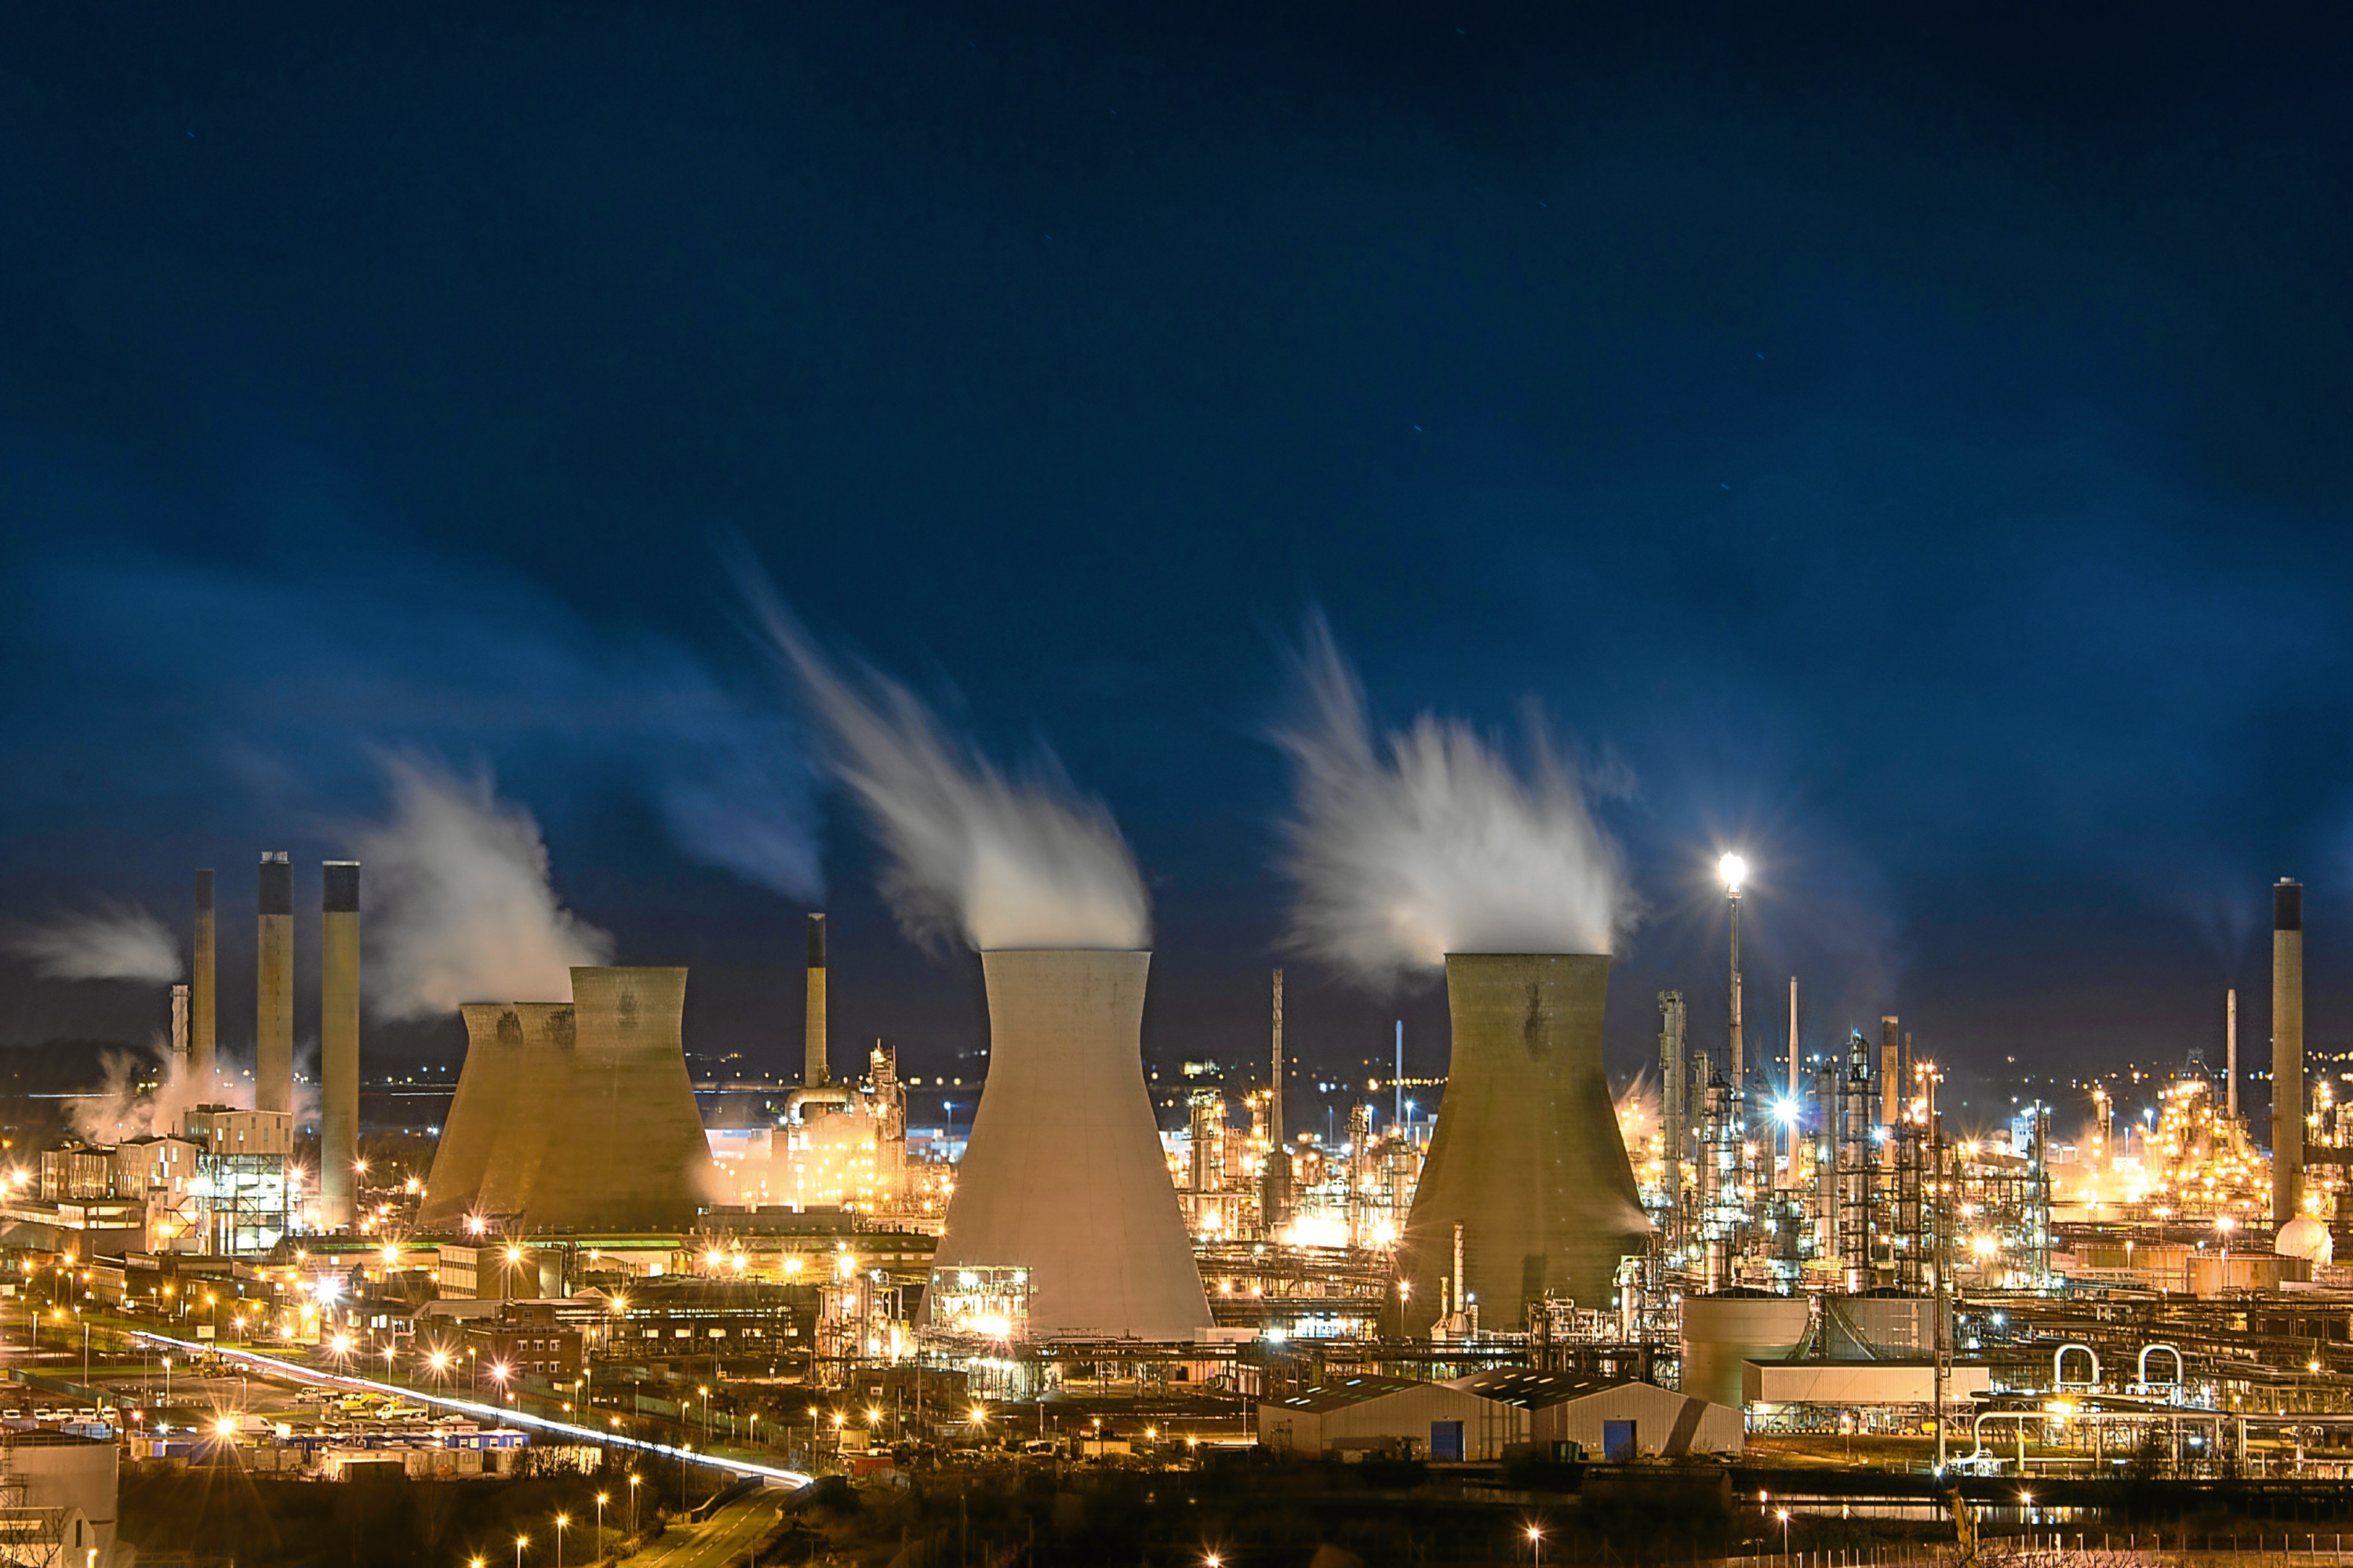 Ineos Grangemouth oil and petrochemicals refinery, one of the largest of its kind in Europe.